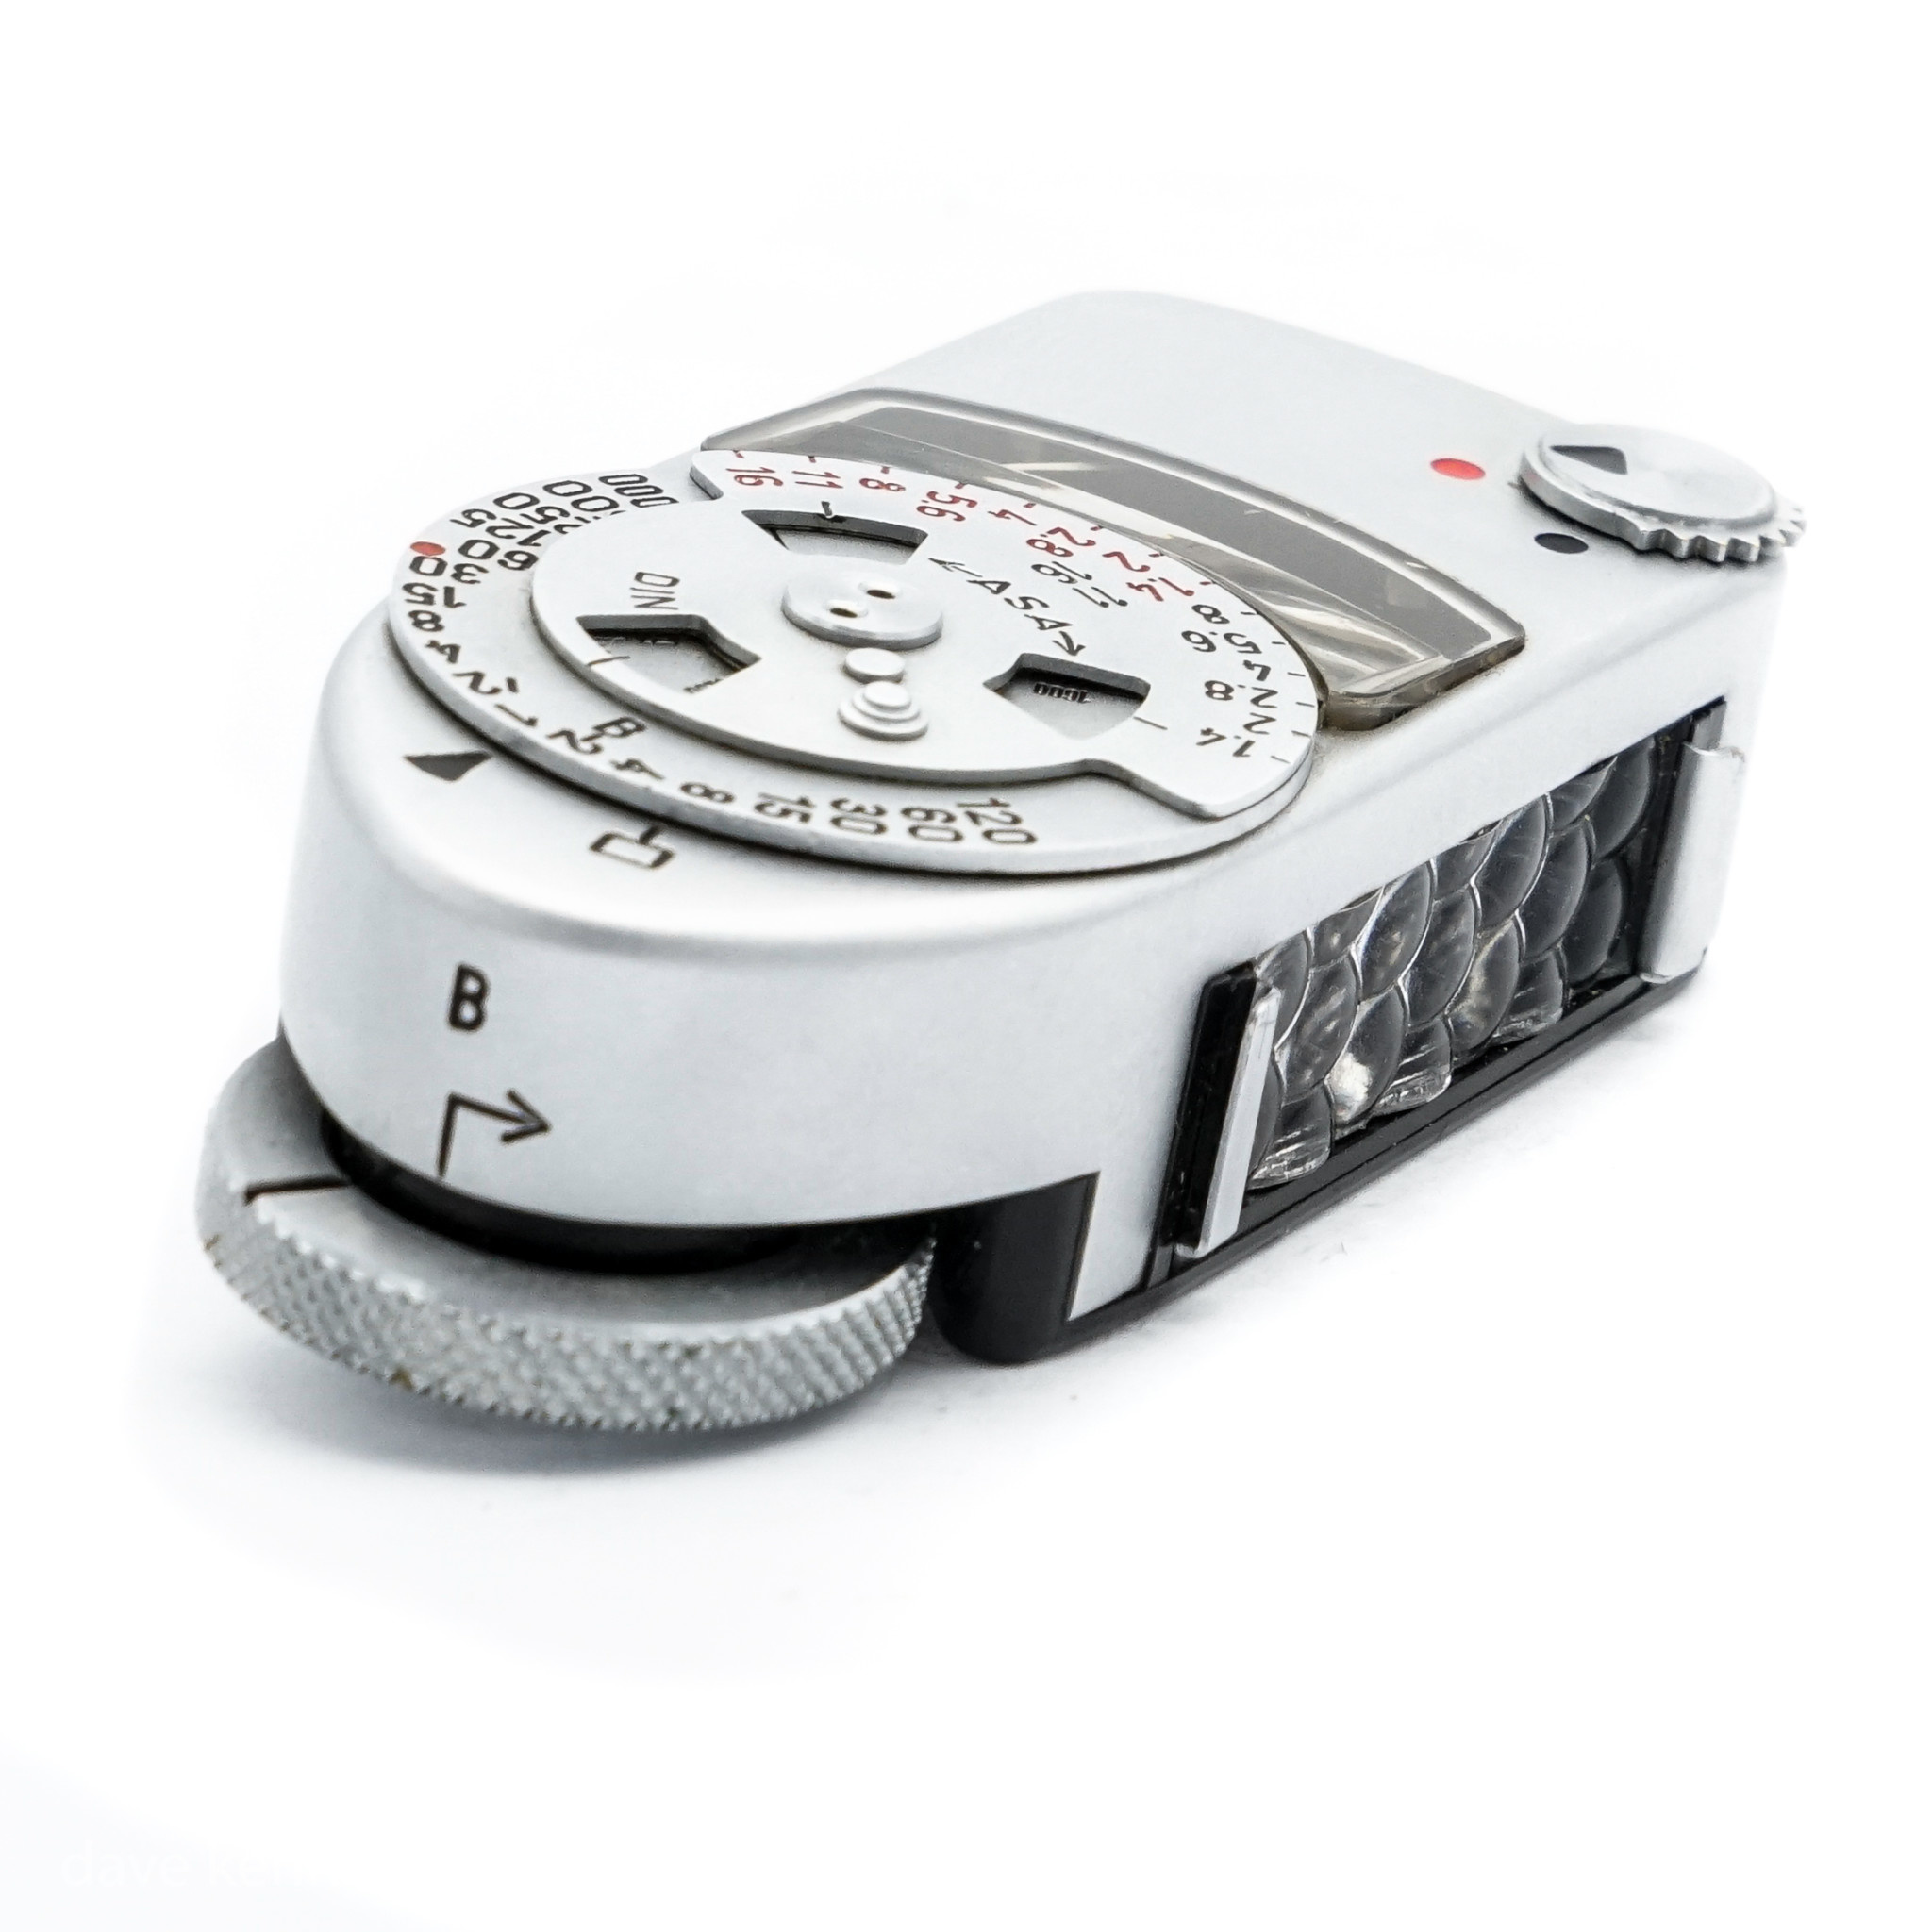 Pre Owned Leica MR Meter x1000 - Leica Store Manchester